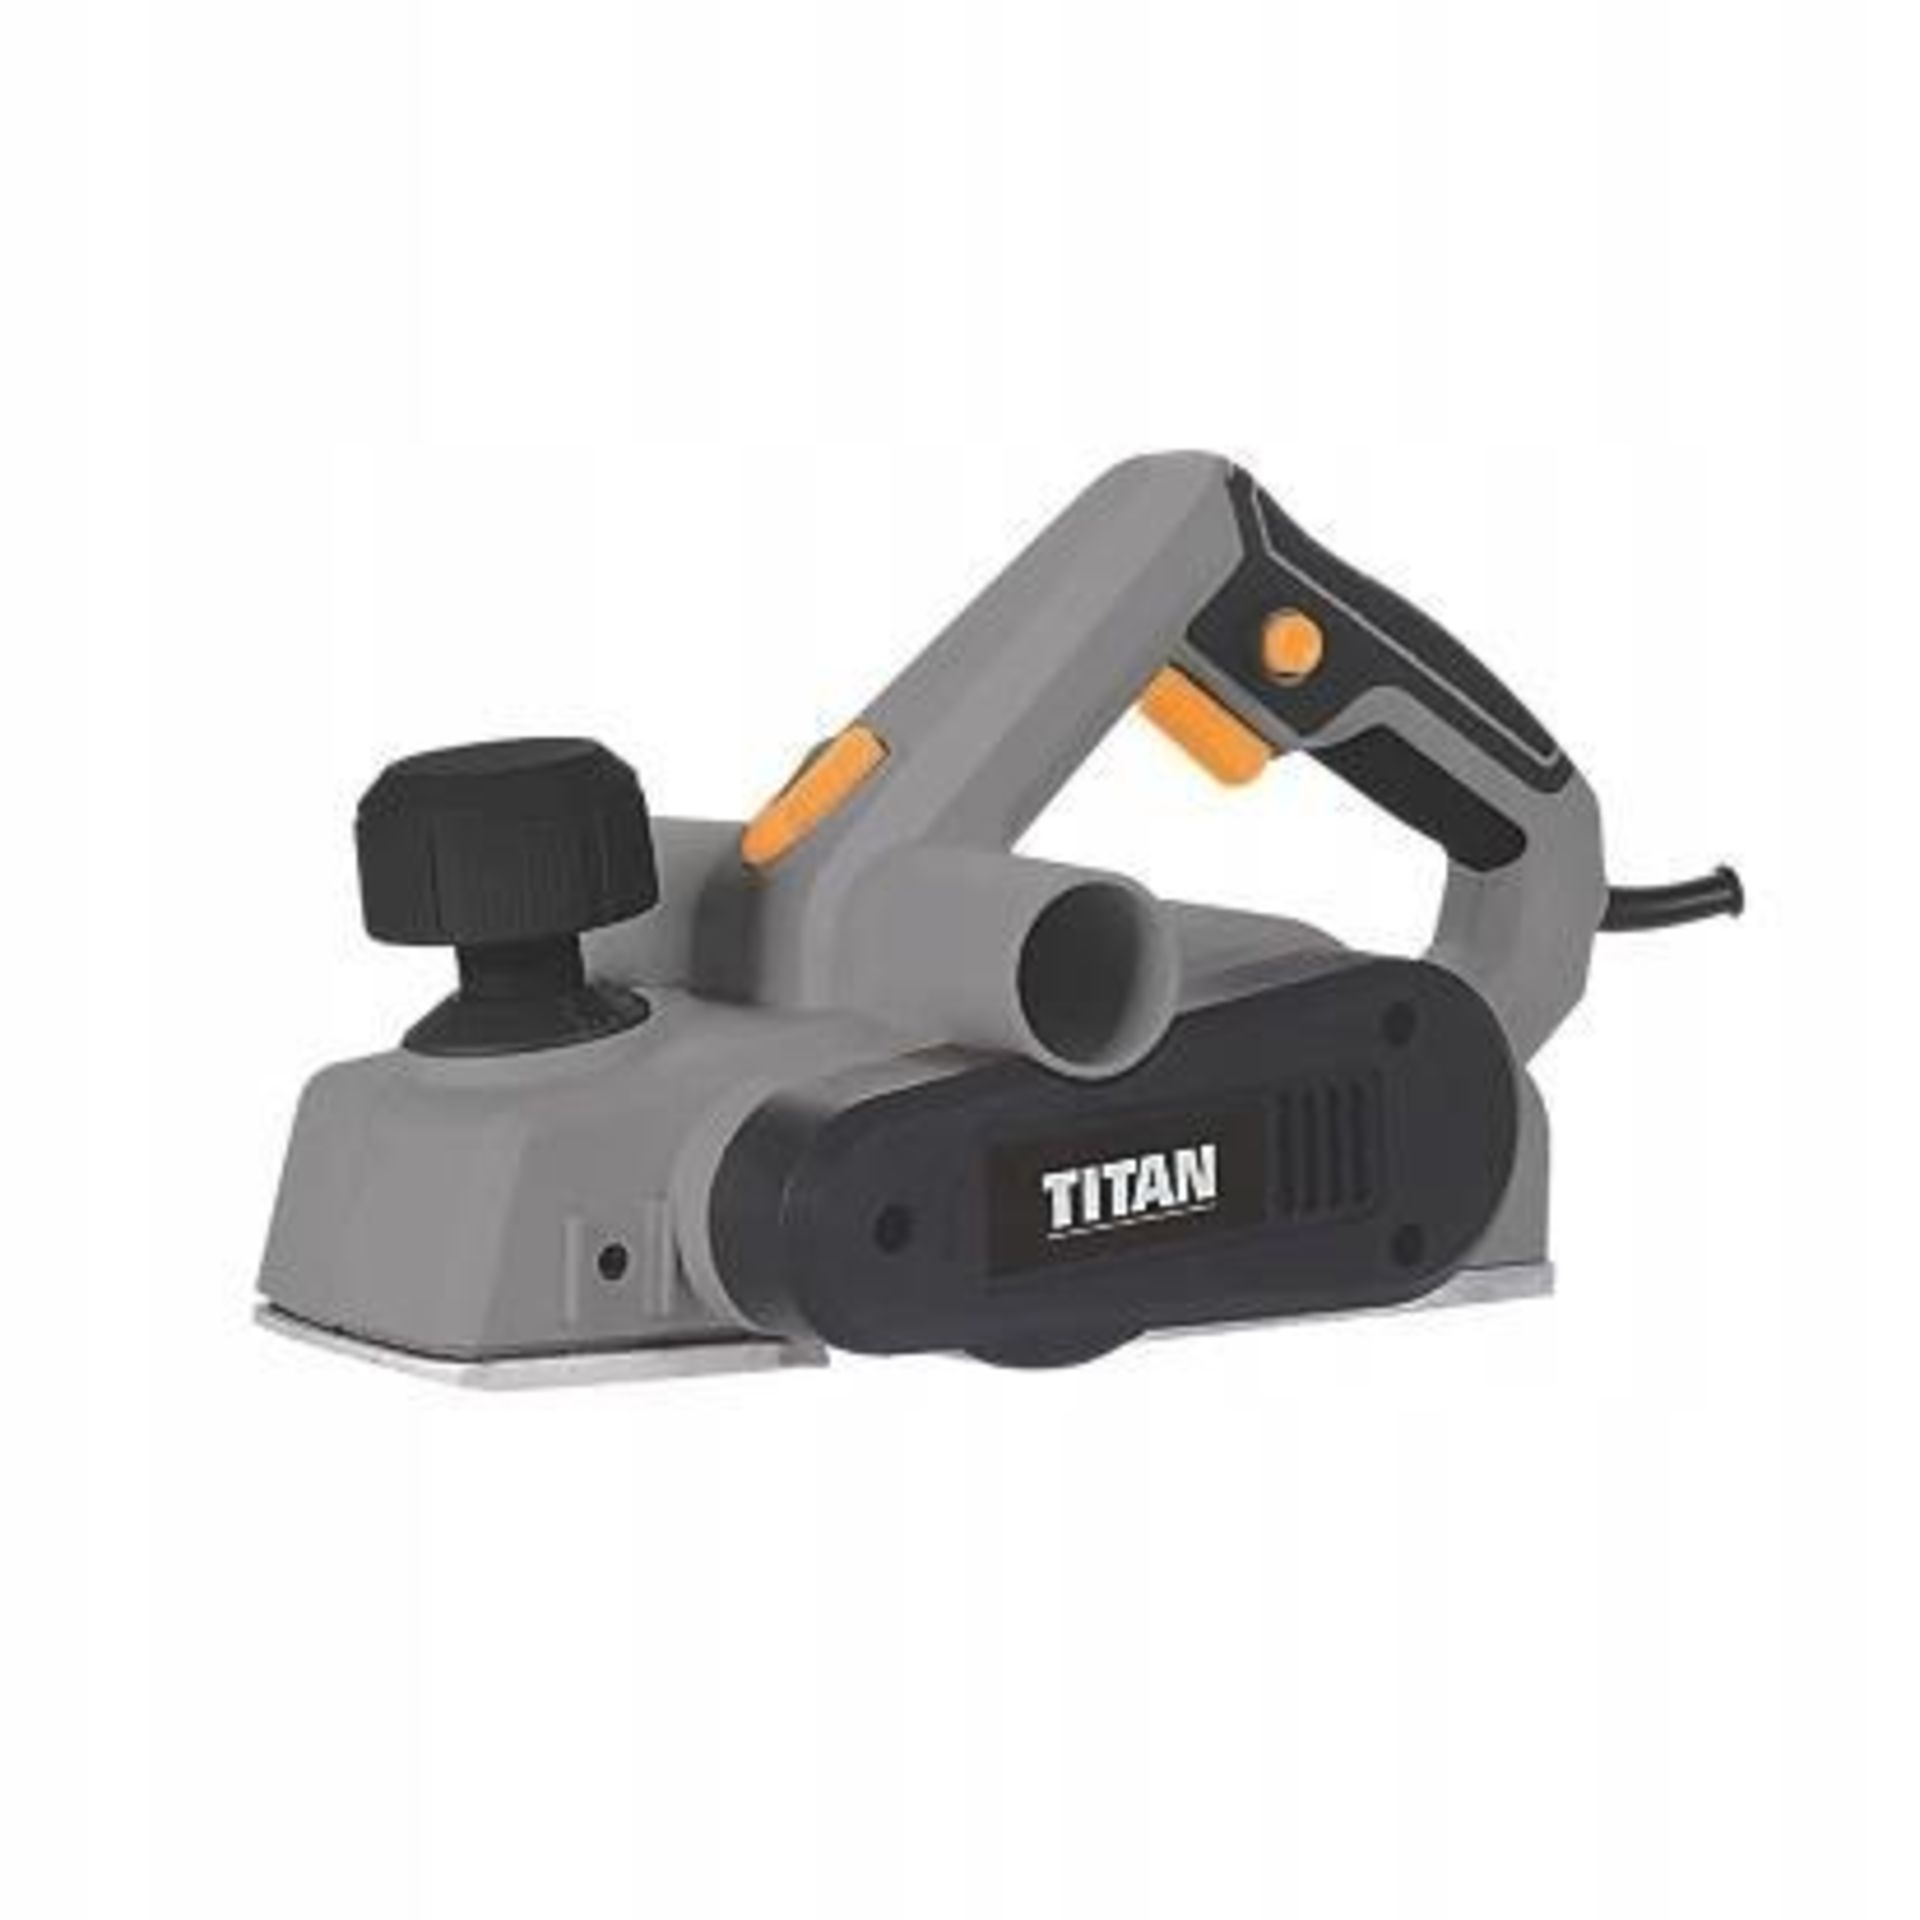 2 x Titan Electric PlanerTTB876PLN 900W 240V Soft Grip For Wood Smoothing Surfaces Dust - R14.14.